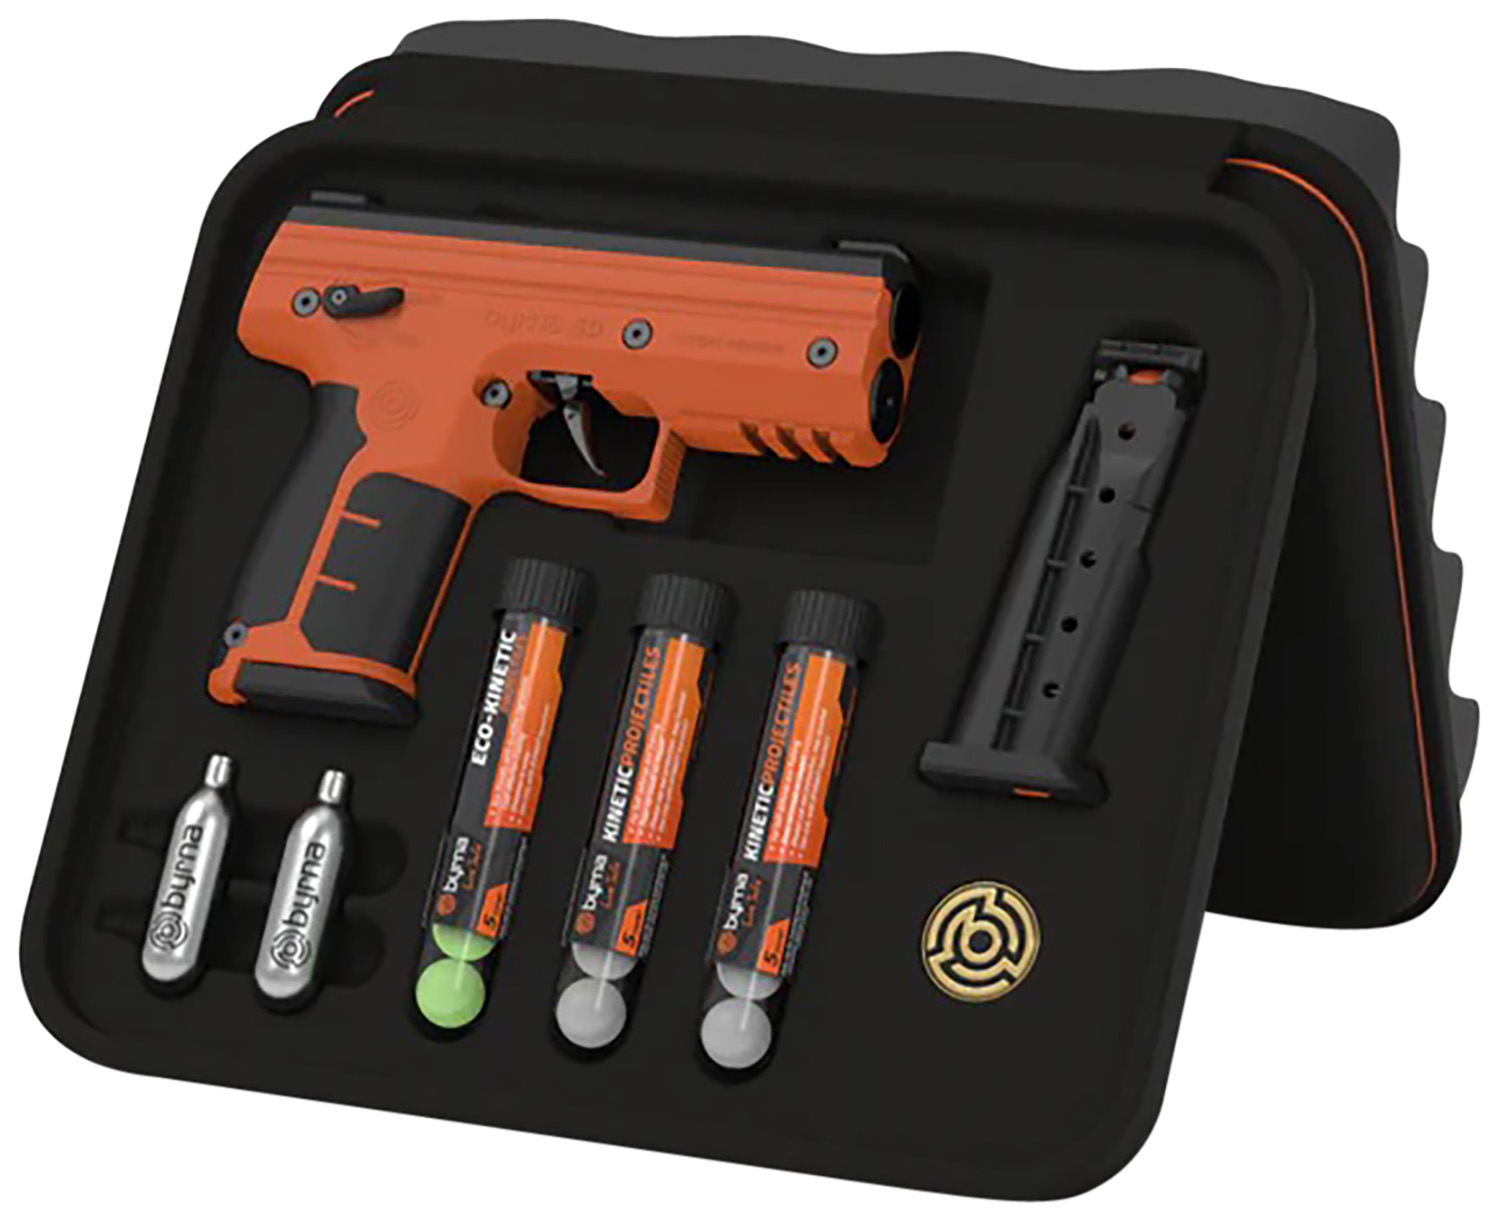 BYRNA SD KINETIC KIT ORANGE W/ 2 MAGS & PROJECTILES